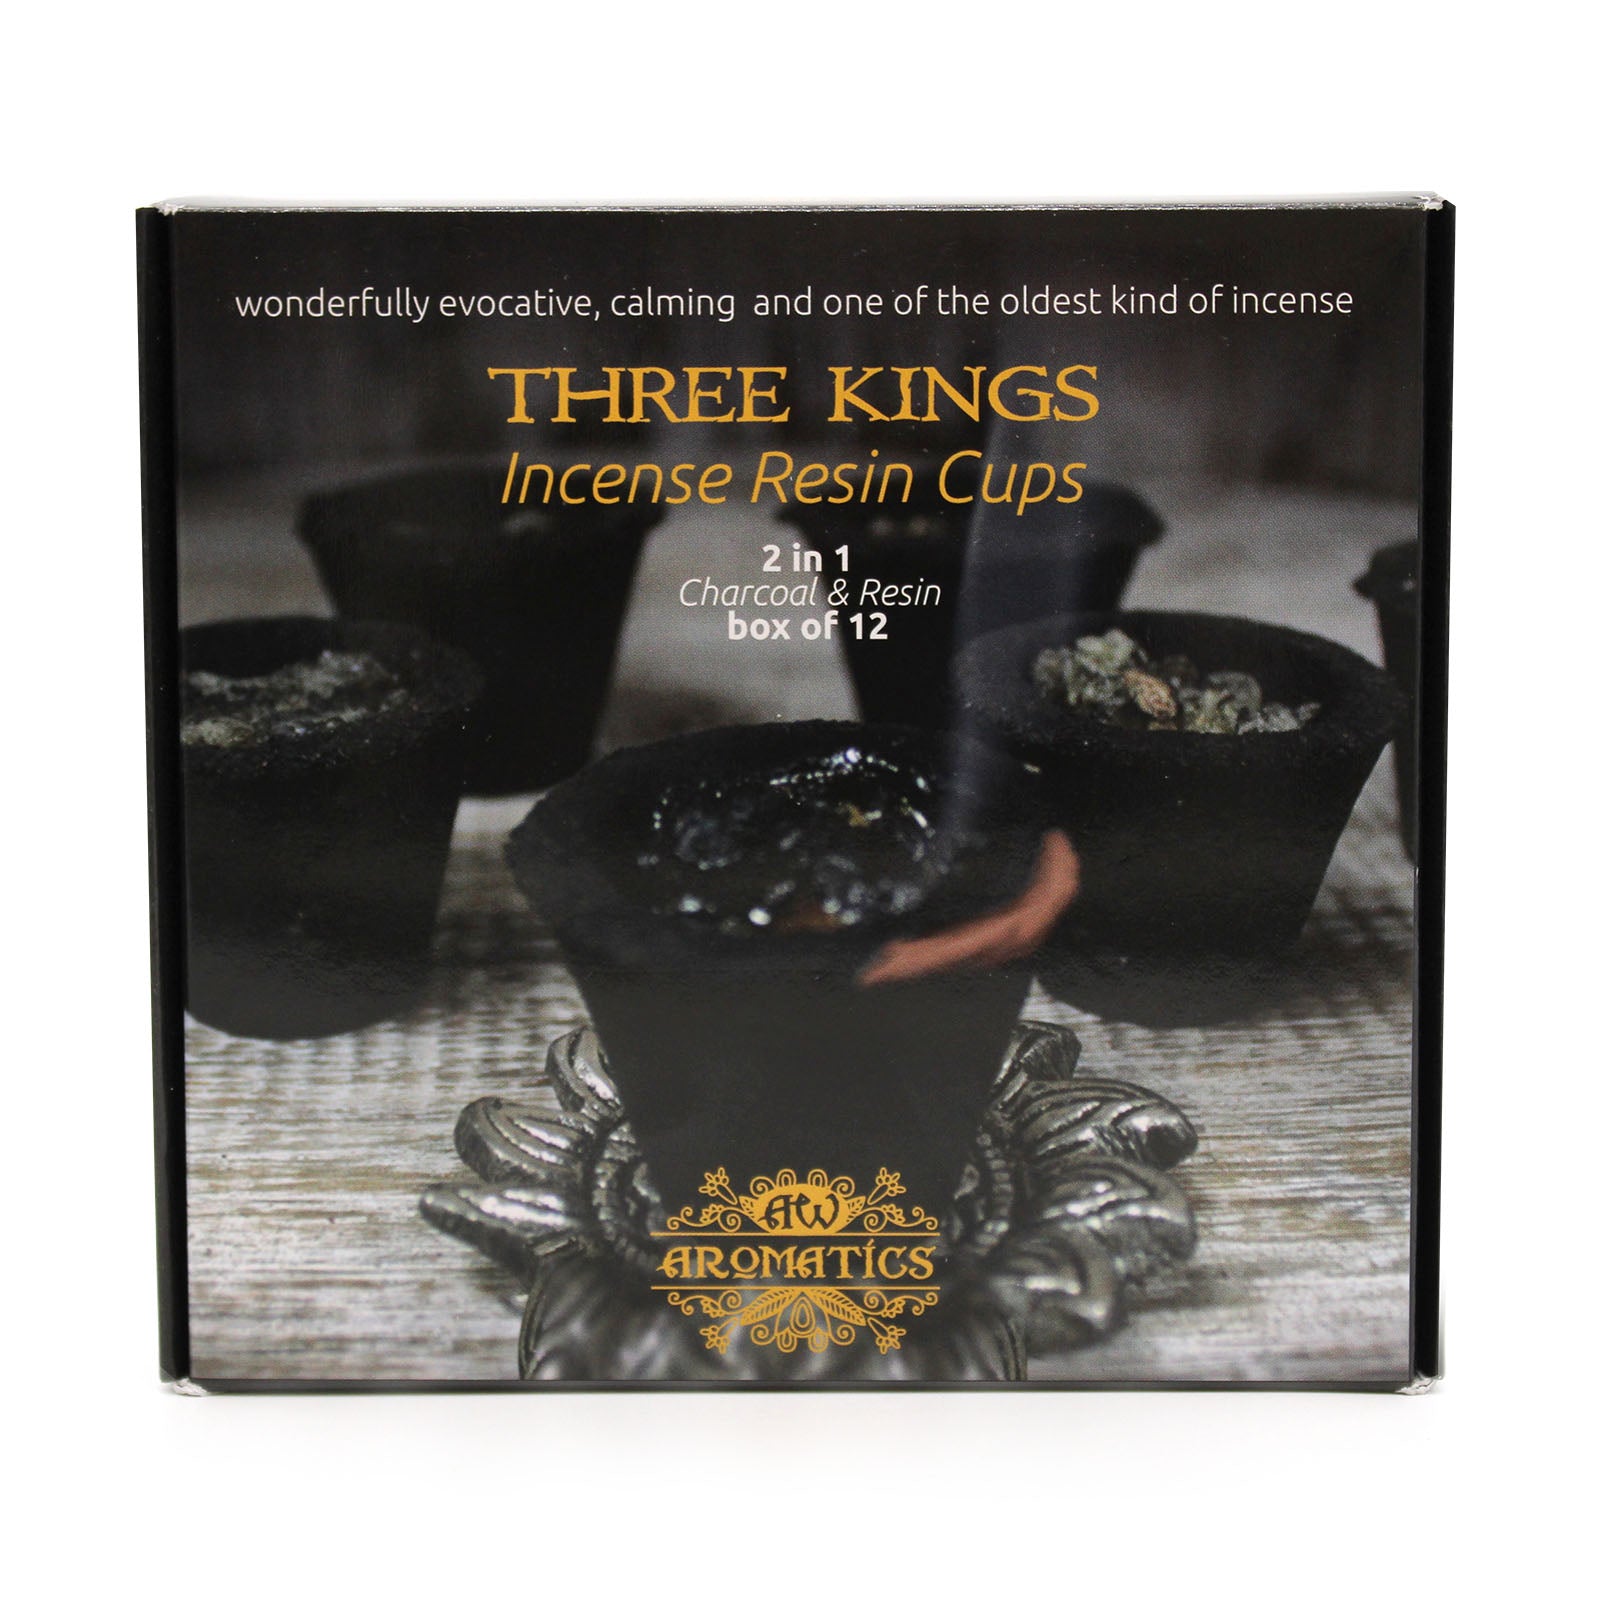 View Box of 12 Resin Cups Three Kings information